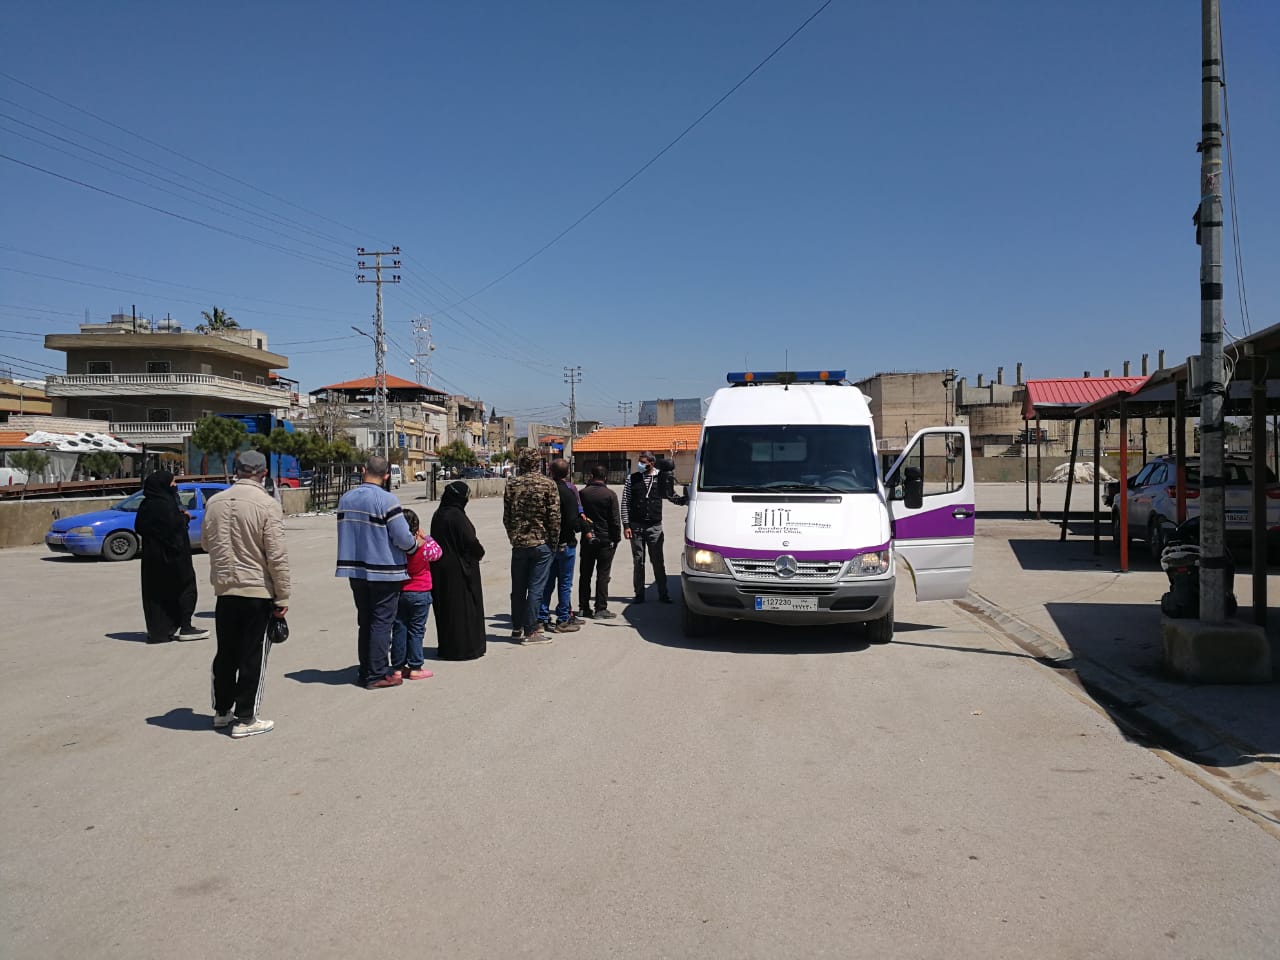 Mobile clinic for refugee camps in Lebanon